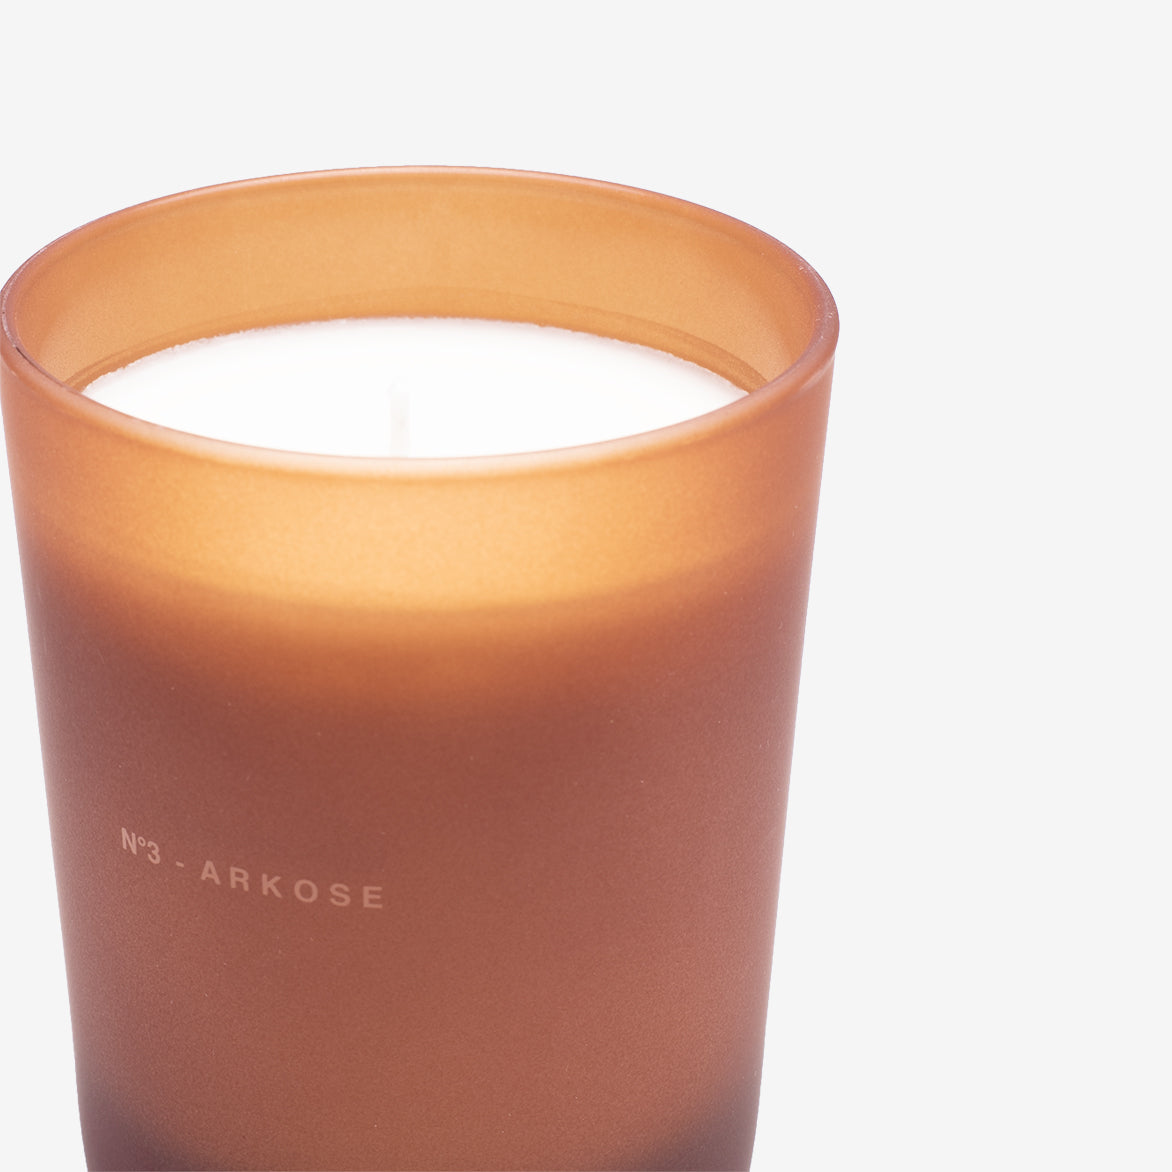 NO.3 ARKROSE CANDLE